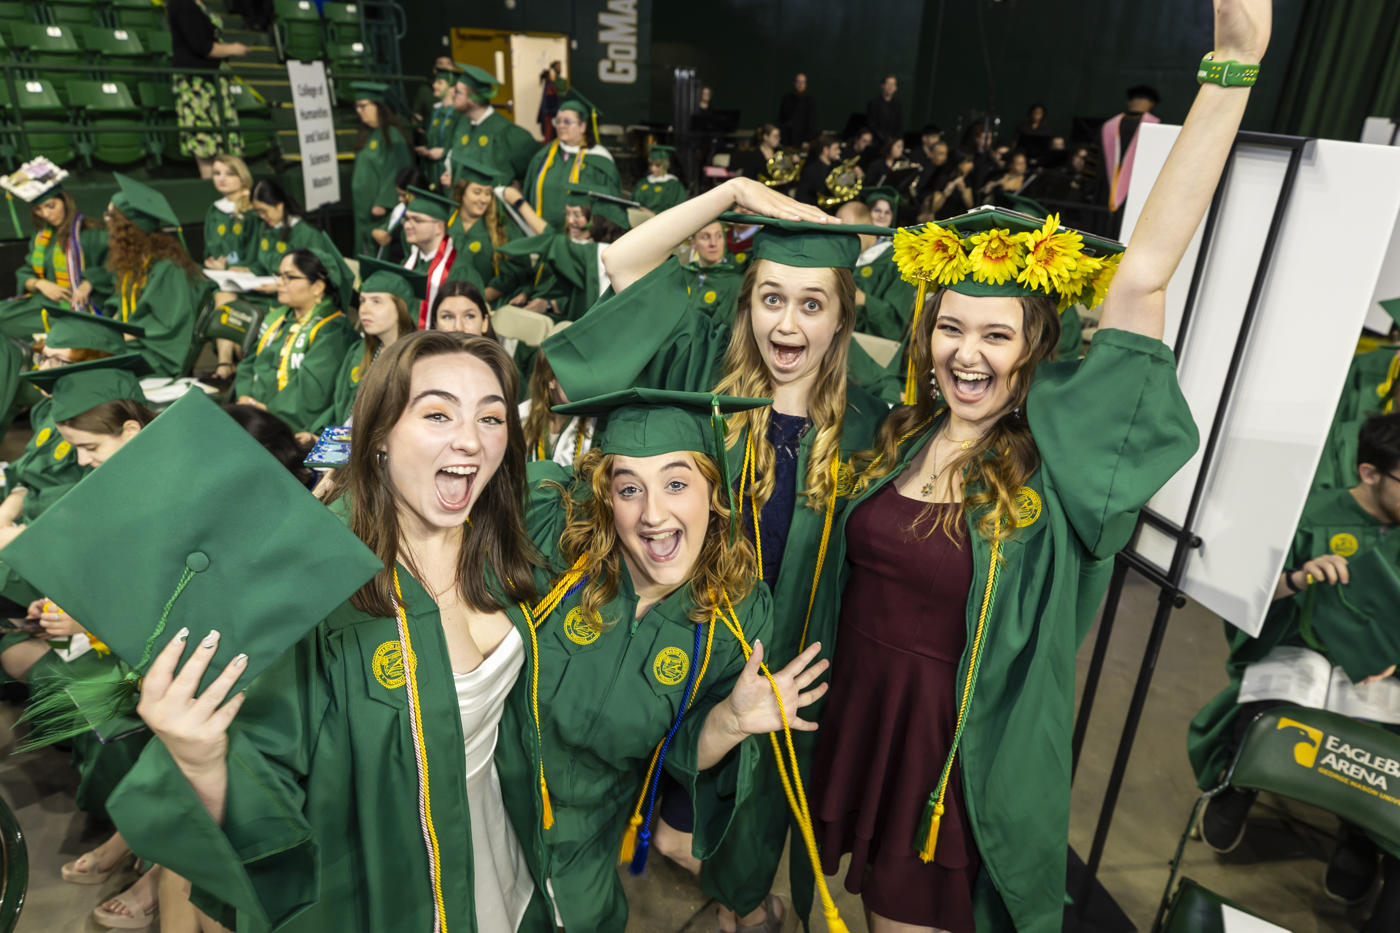 Graduates celebrate at the end of the Commencement ceremony